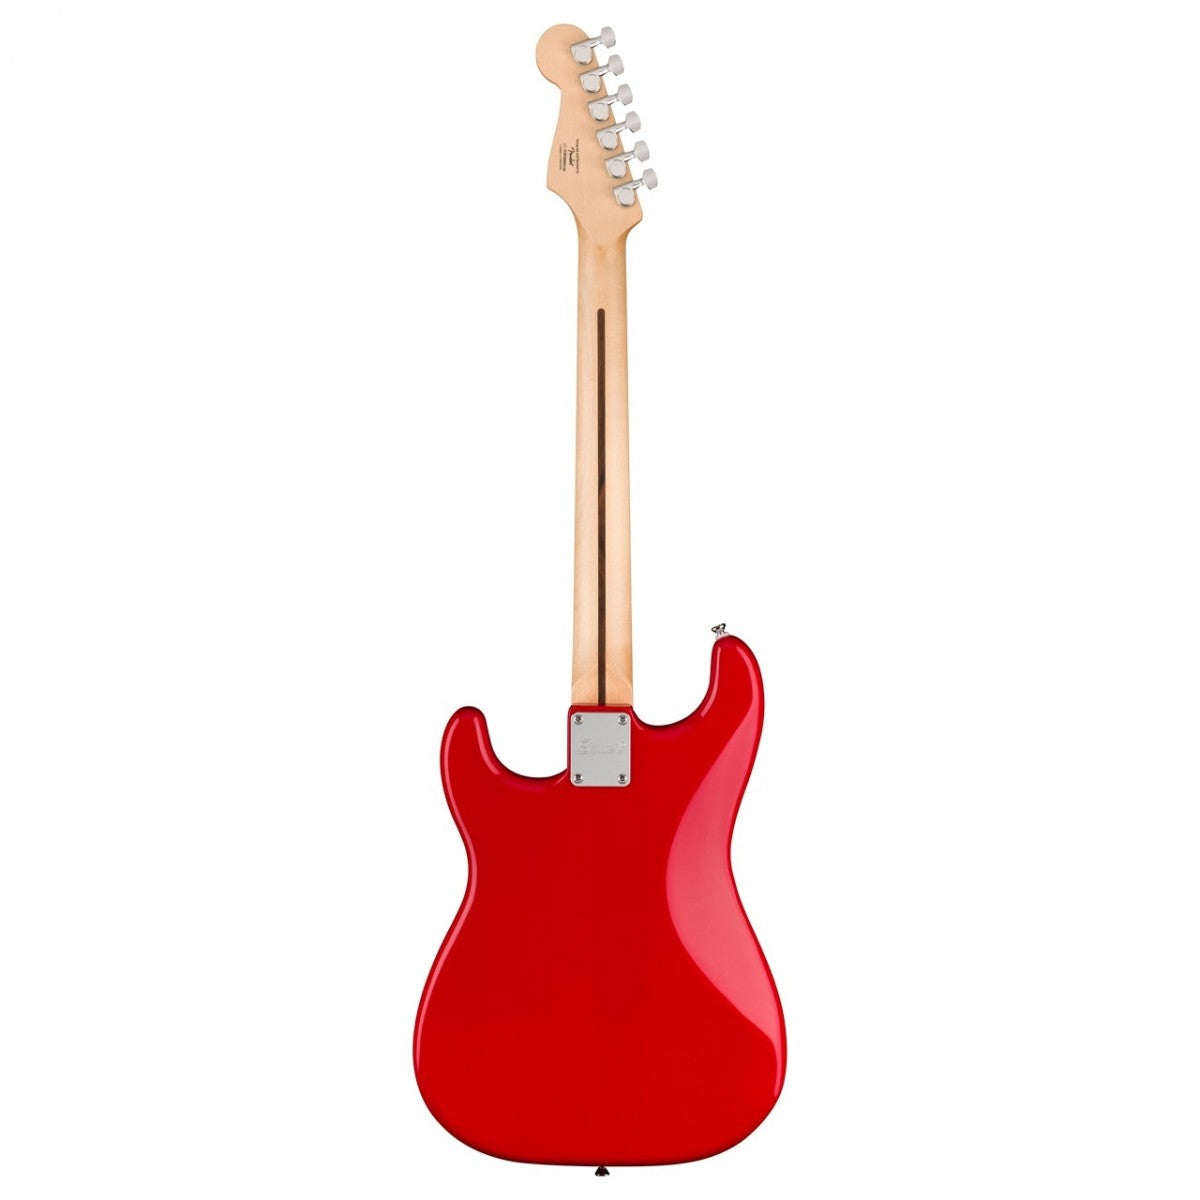 Squier Sonic Stratocaster Hardtail - Torino Red